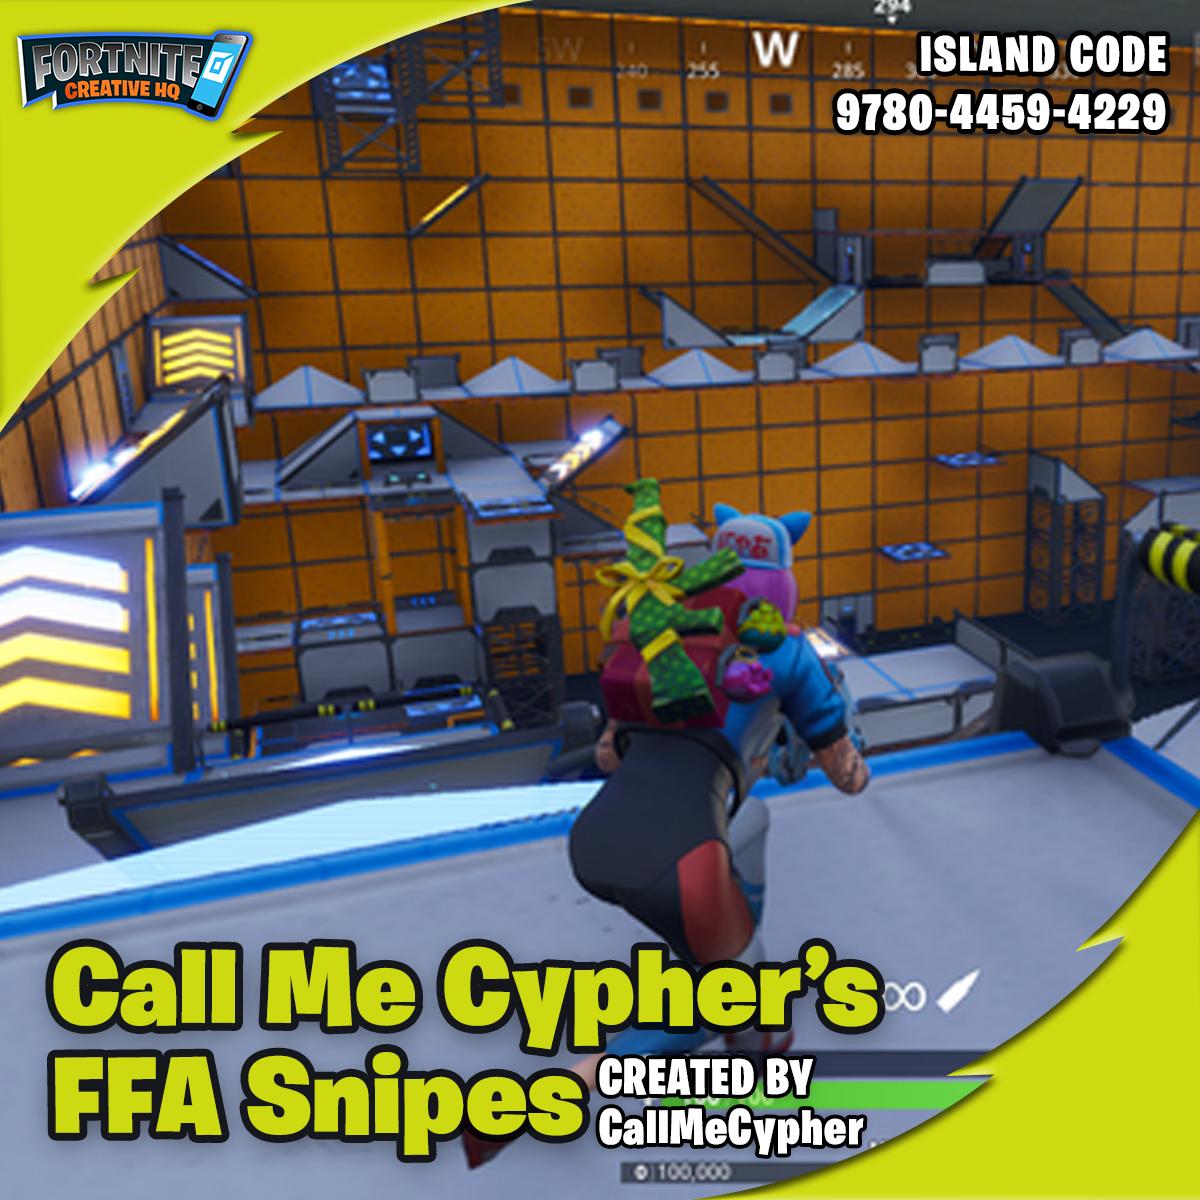 Fchq Fortnitecreative S Ffa Alert Check Out The Callmecypher S Ffa Snipes By Callmecypher Tv Gather Up Get Your Weapons And Indulge In The Free For All Sniper Map T Co L7vxddxuuv Fortnite Fortnitecommunity Epicgames